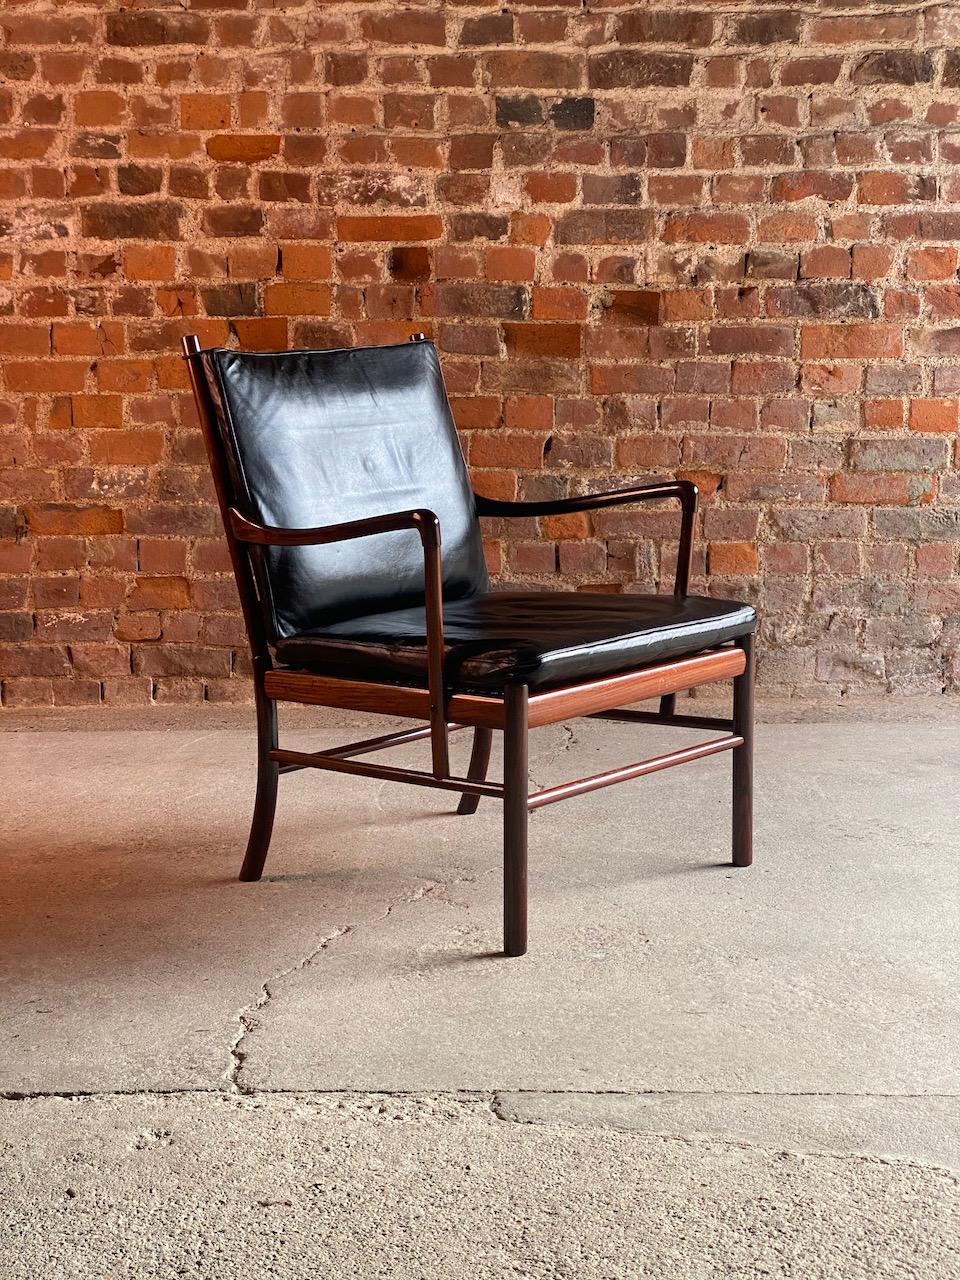 Ole Wanscher Model 149 rosewood Colonial chair by Poul Jeppesens Denmark circa 1950

Magnificent mid century Ole Wanscher Model 149 'Colonial' chair in Brazilian Rosewood for cabinet maker Poul Jeppesens Møbelfabrik, Denmark circa 1950, this very